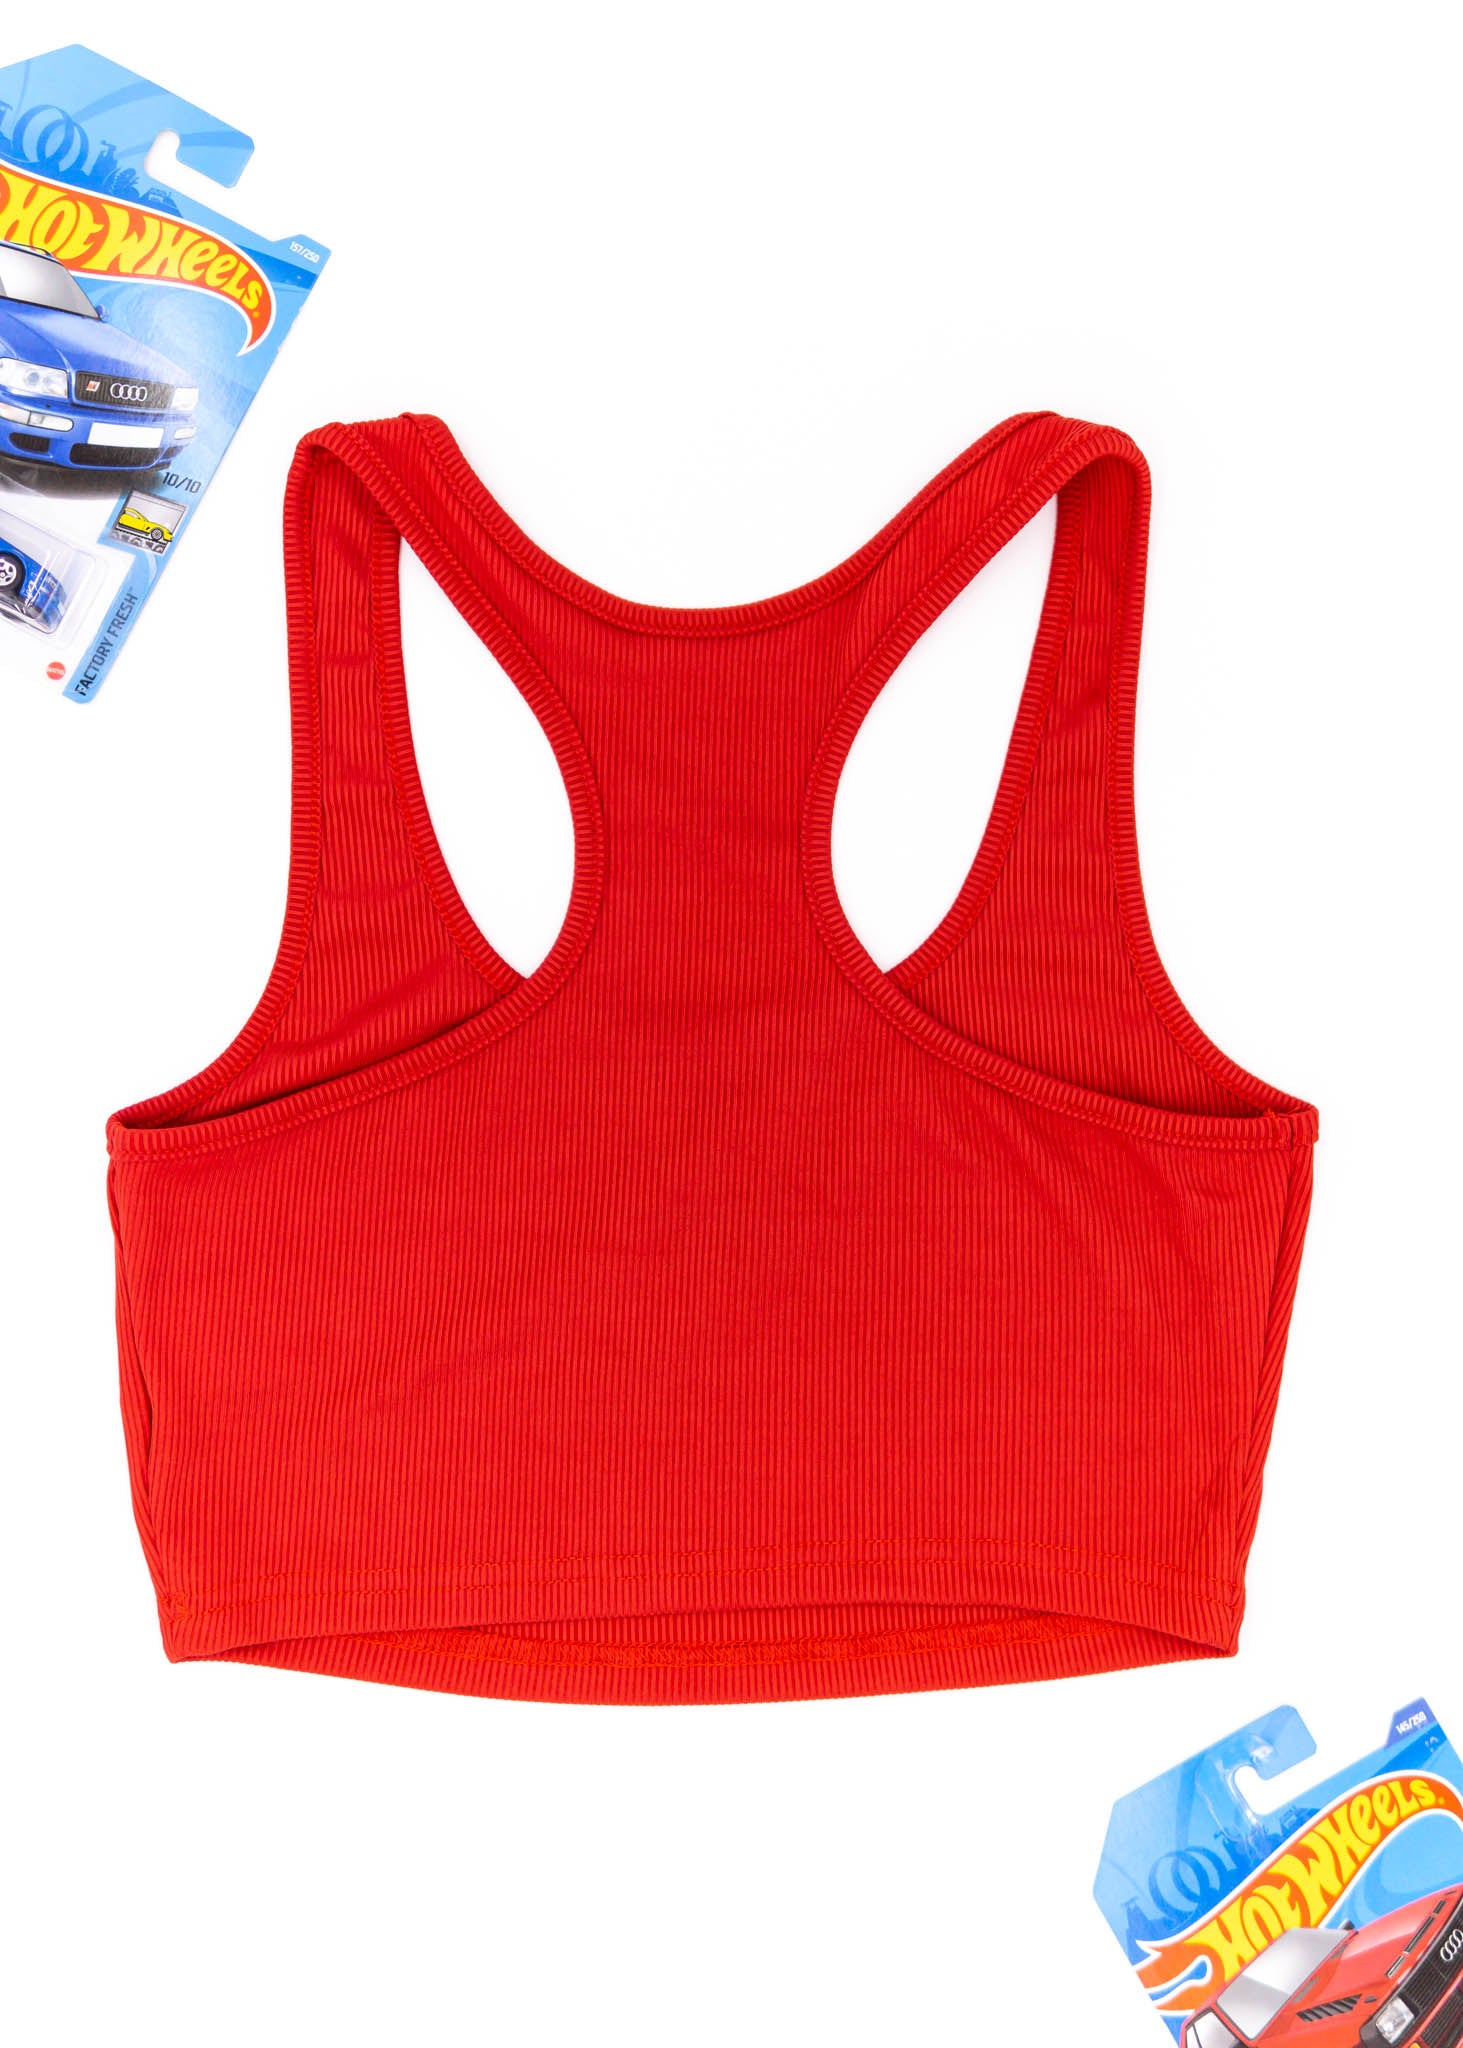 A red Audi crop top for women. Photo is a back view of the top with an embroidered Audi Sport Quattro S1 E2. Fabric composition is polyester, and cotton. The material is stretchy, ribbed, and non-transparent. The style of this shirt is sleeveless, with a scoop neckline.